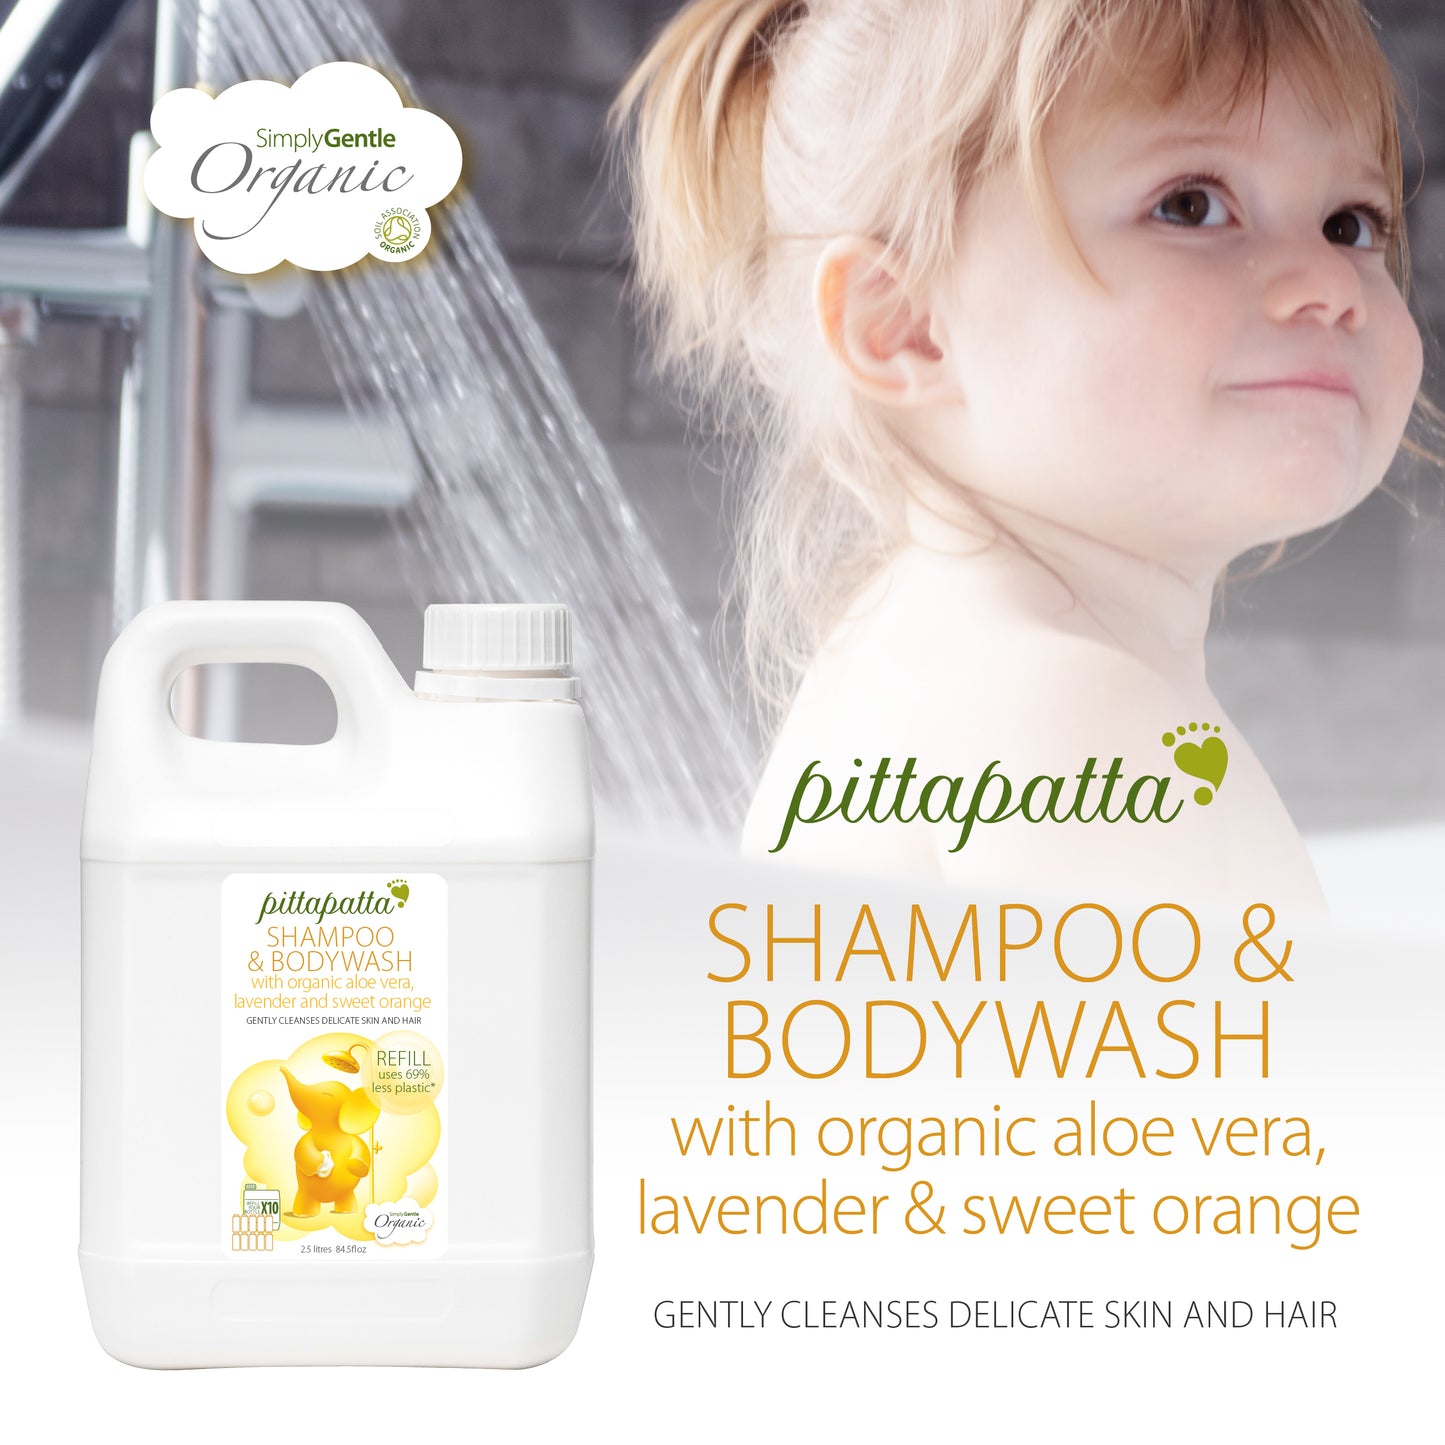 Pittapatta Shampoo & Bodywash is made with organic sweet orange and lavender combine to soothe and moisturise, keeping delicate skin soft and supple